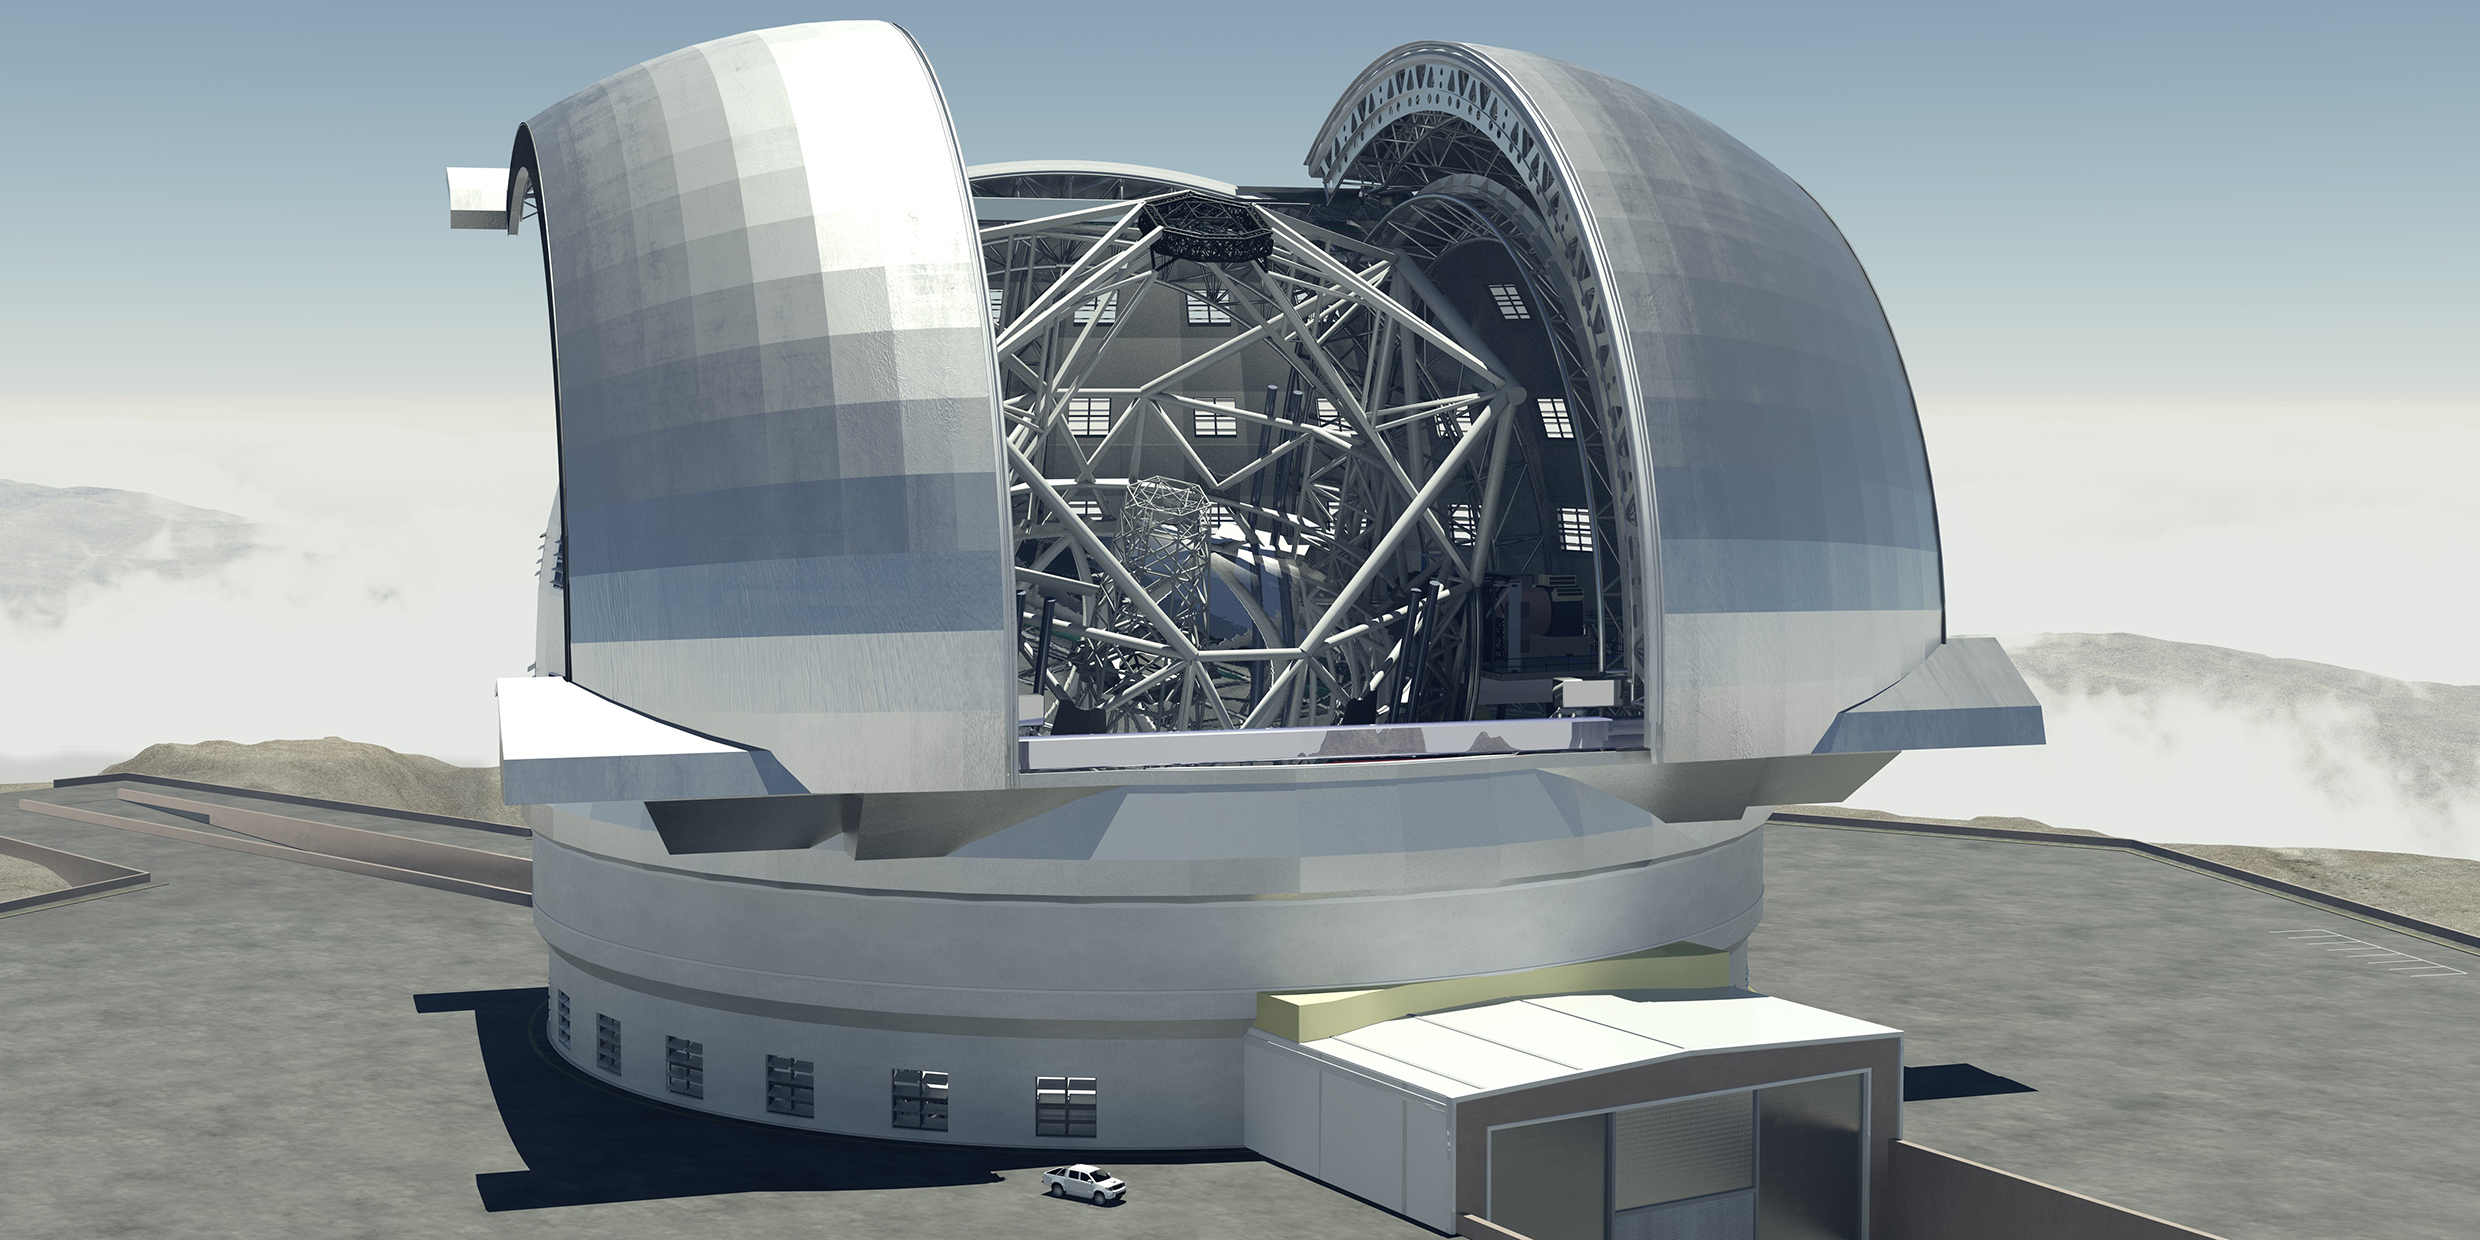 Artist's rendering of the proposed Extremely Large Telescope